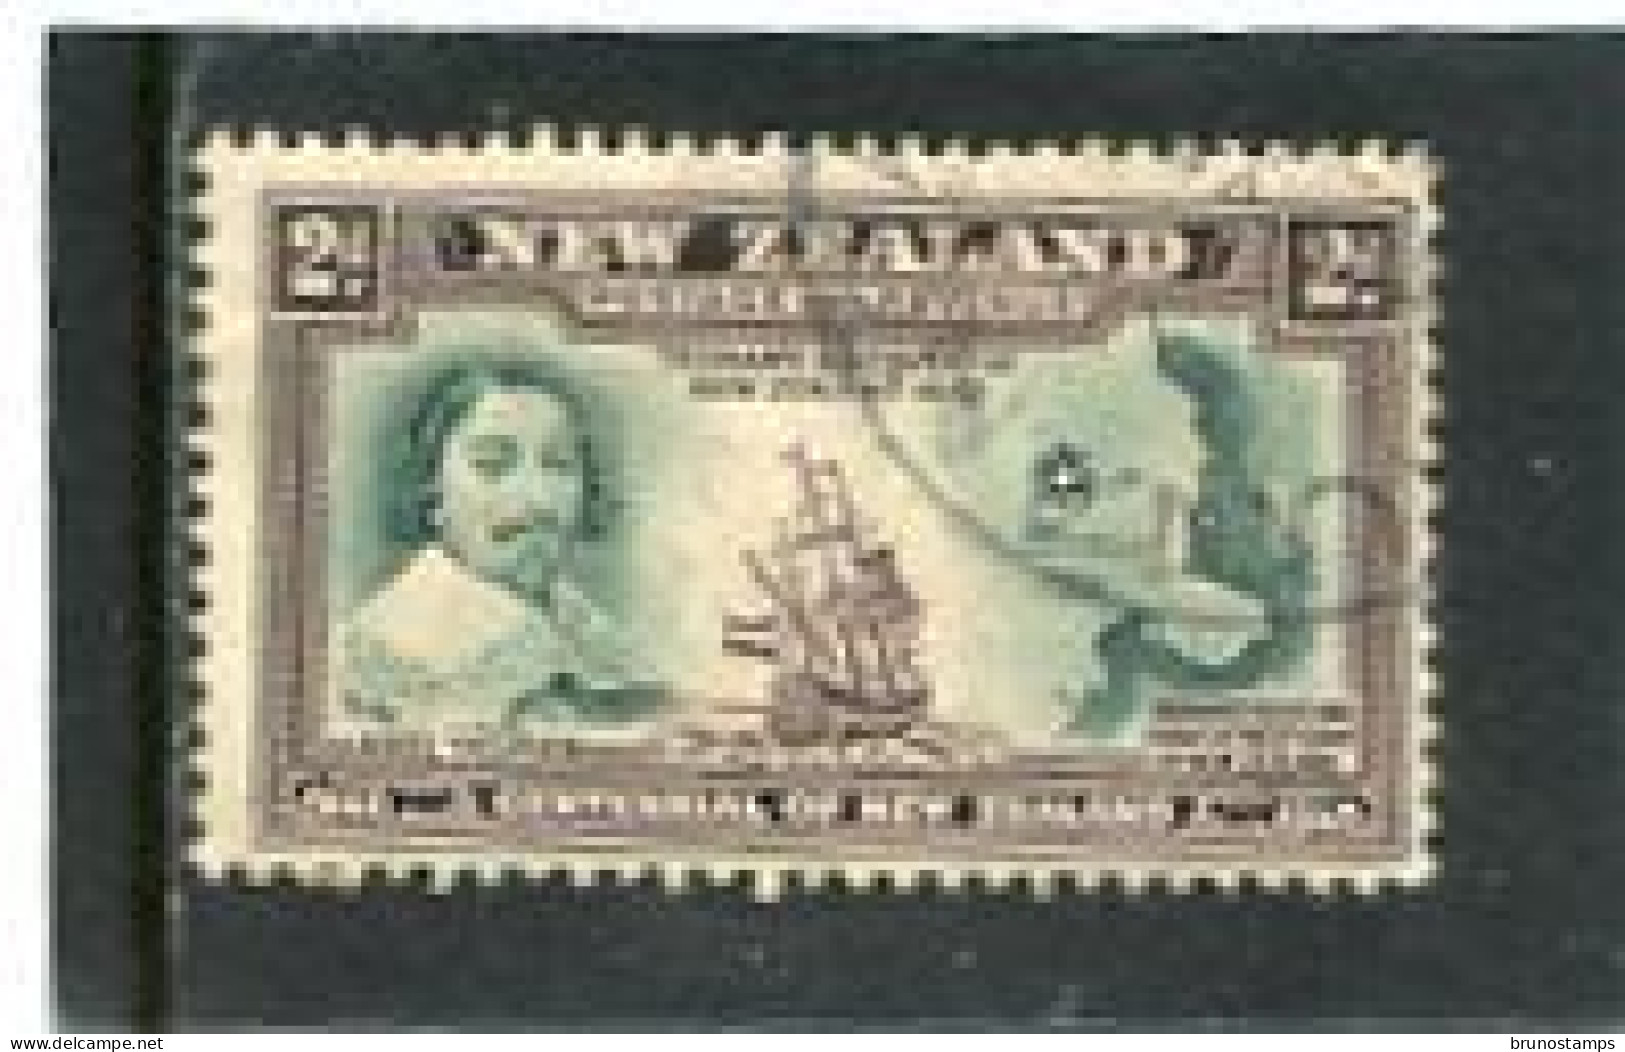 NEW ZEALAND - 1940  2d  BRITISH SOVEREIGNTY  FINE USED  SG 616 - Used Stamps